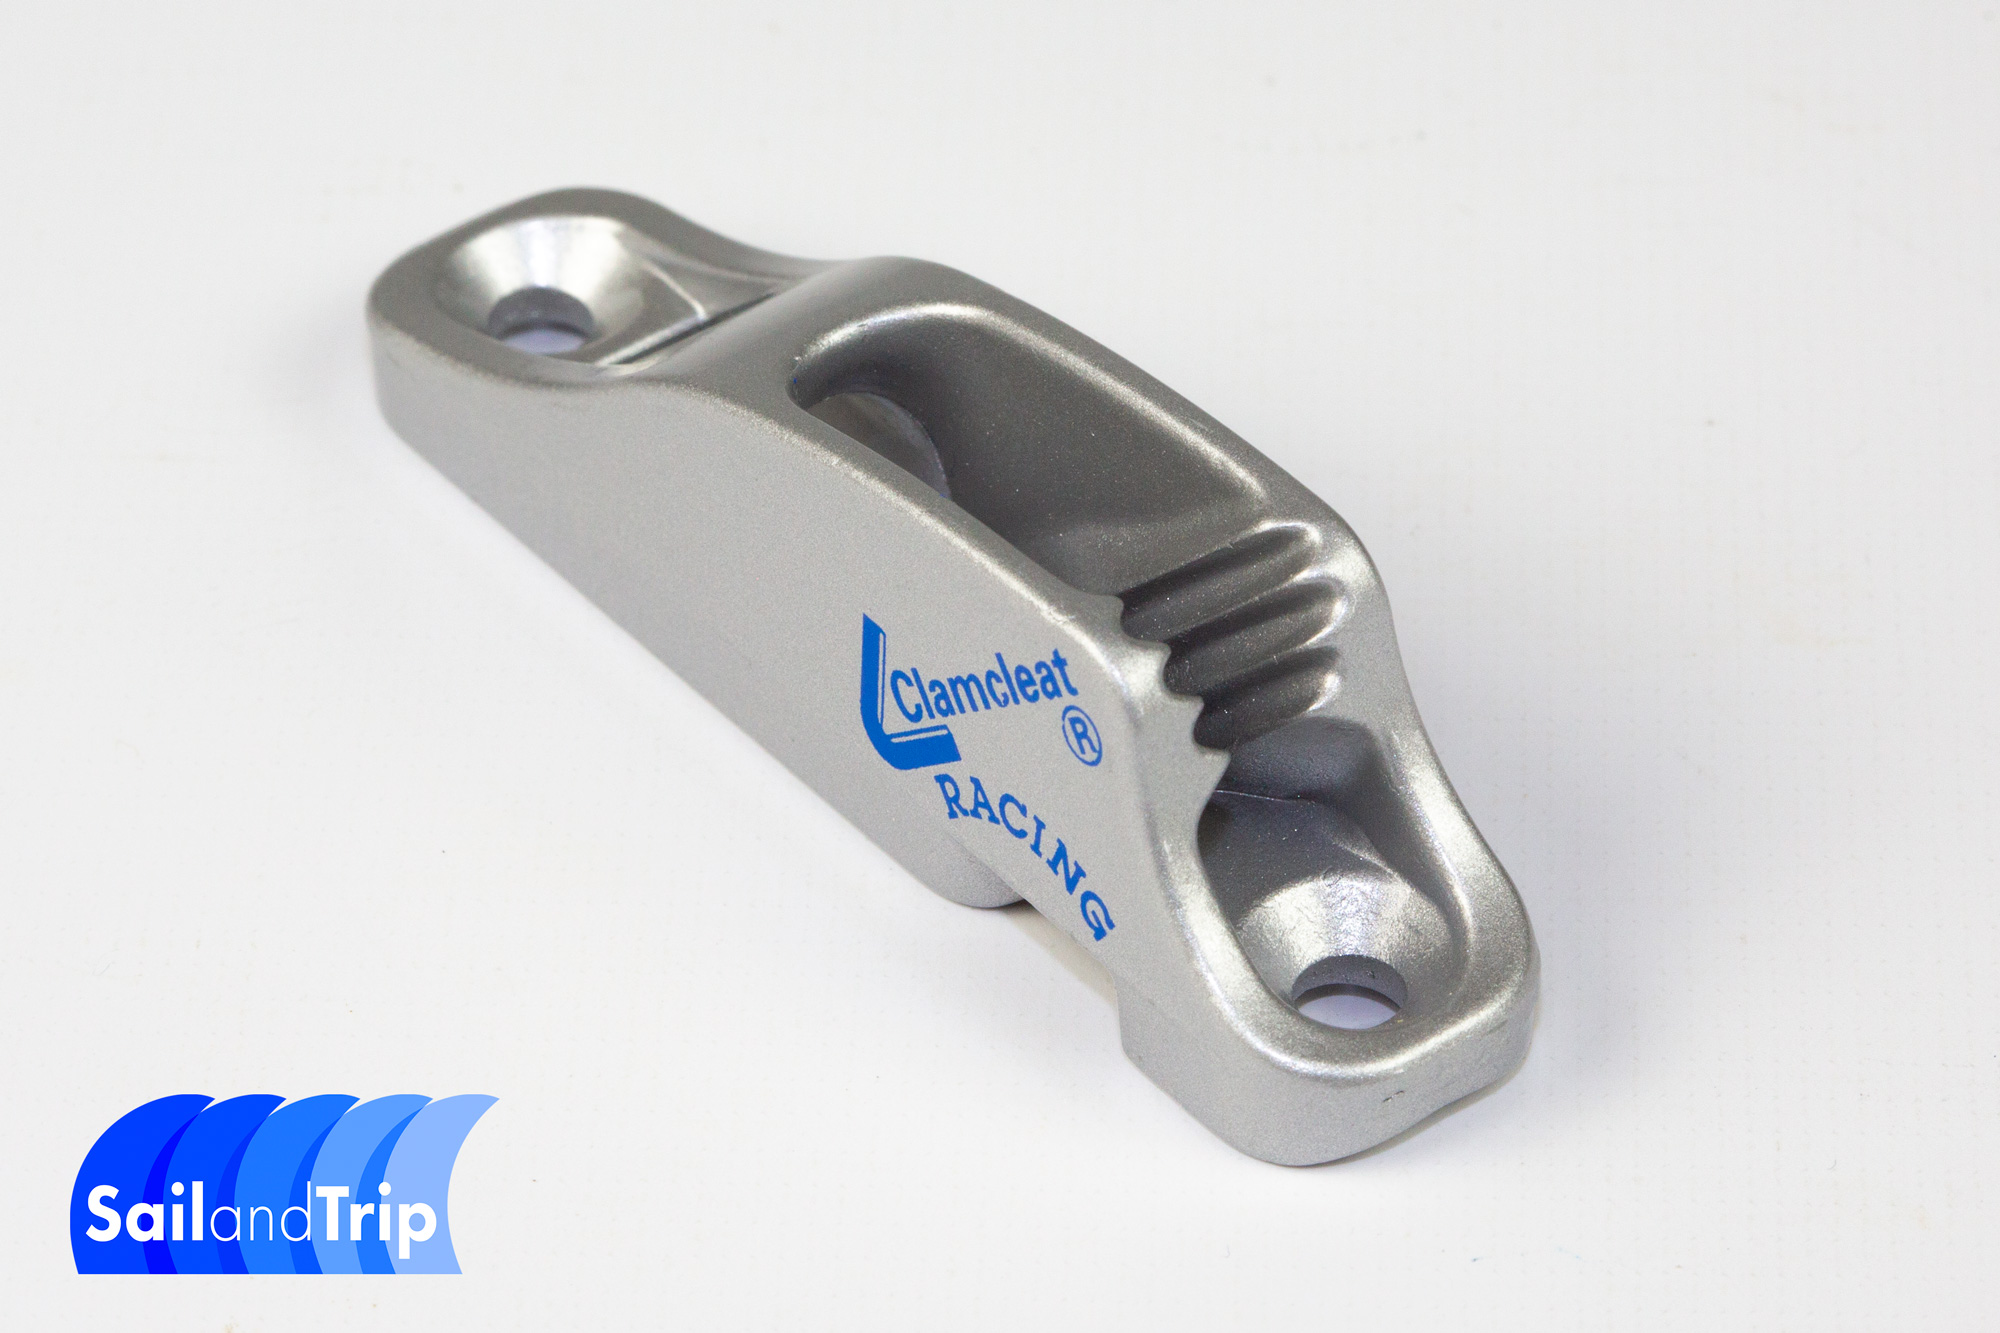 Clamcleat CL270